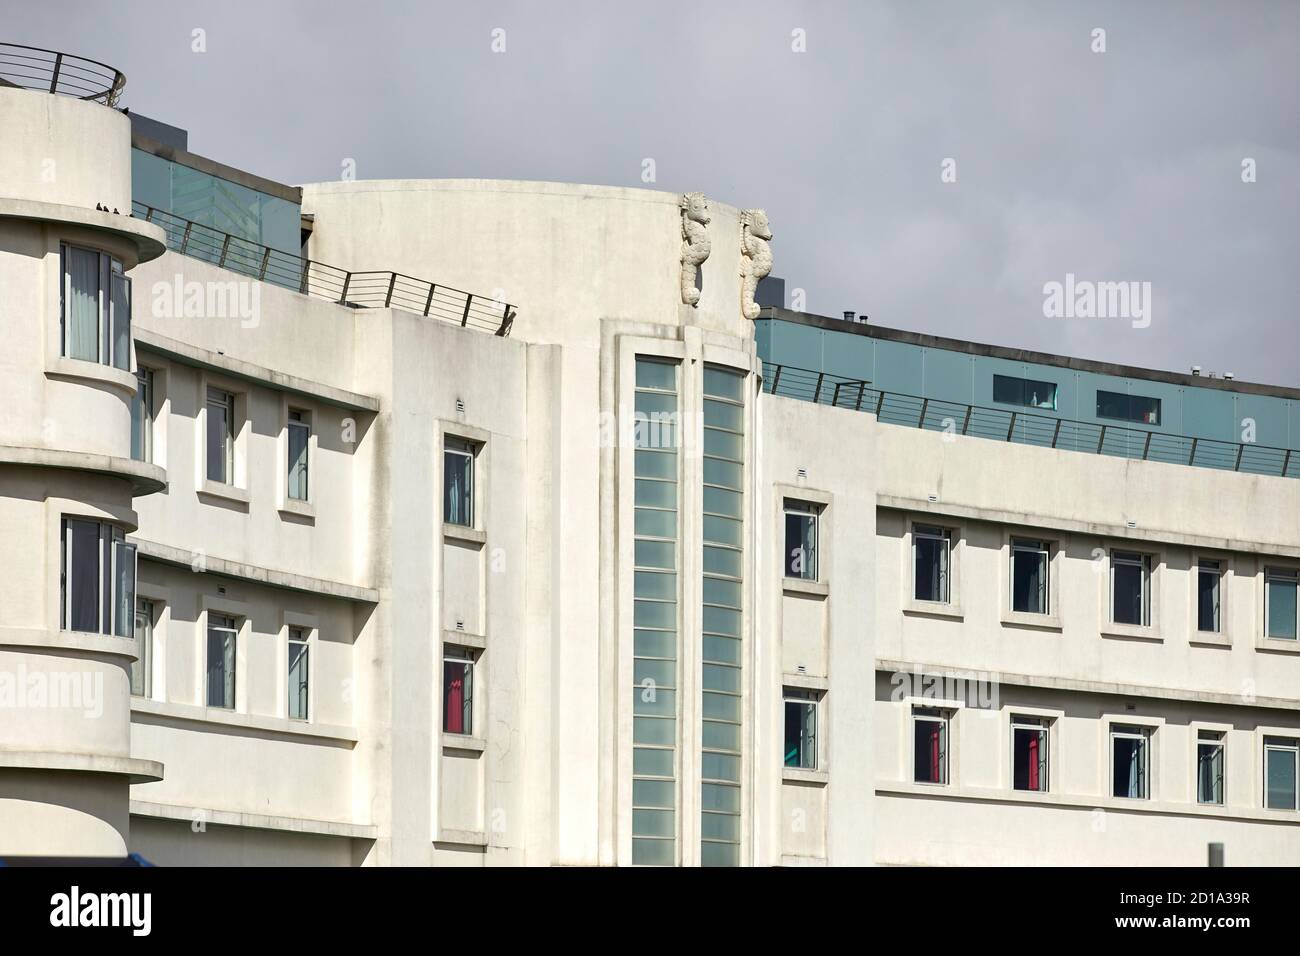 Morecambe bay Lancashire The Midland  Streamline Moderne Grade II* listed art deco seafront hotel built by the London, Midland and Scottish Railway (L Stock Photo